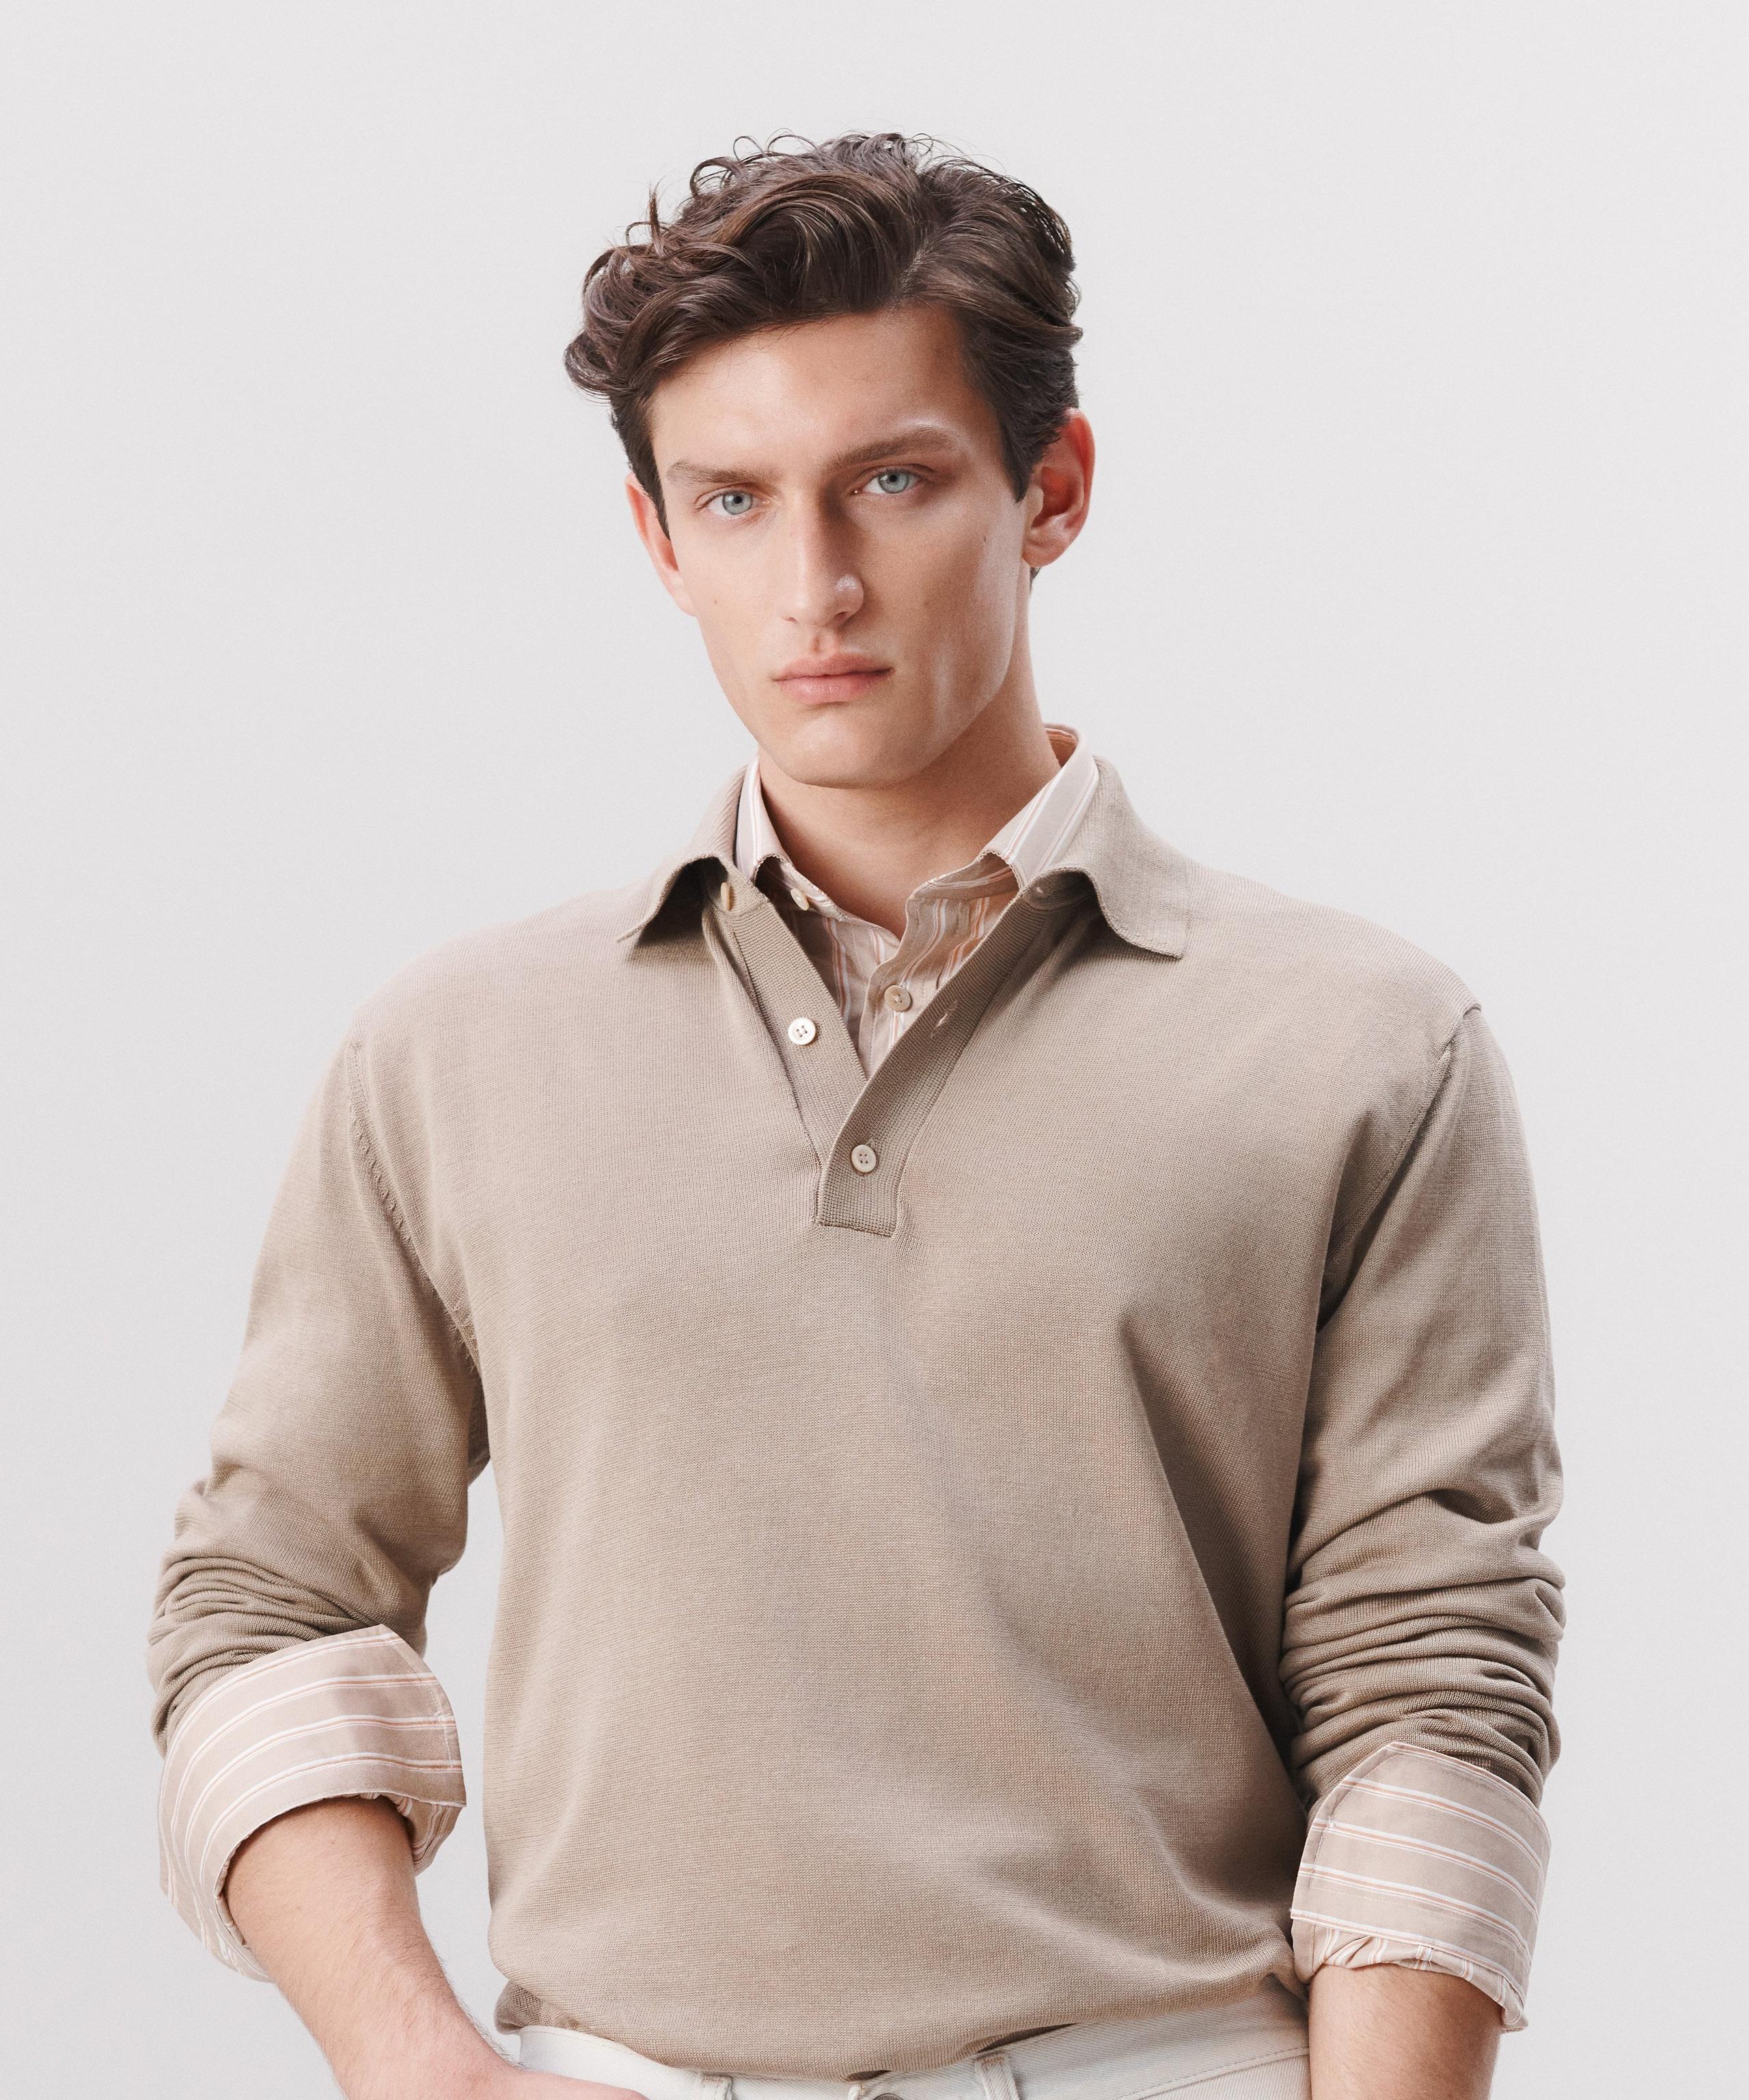 A man wears a shirt layered with a long sleeve polo shirt on top